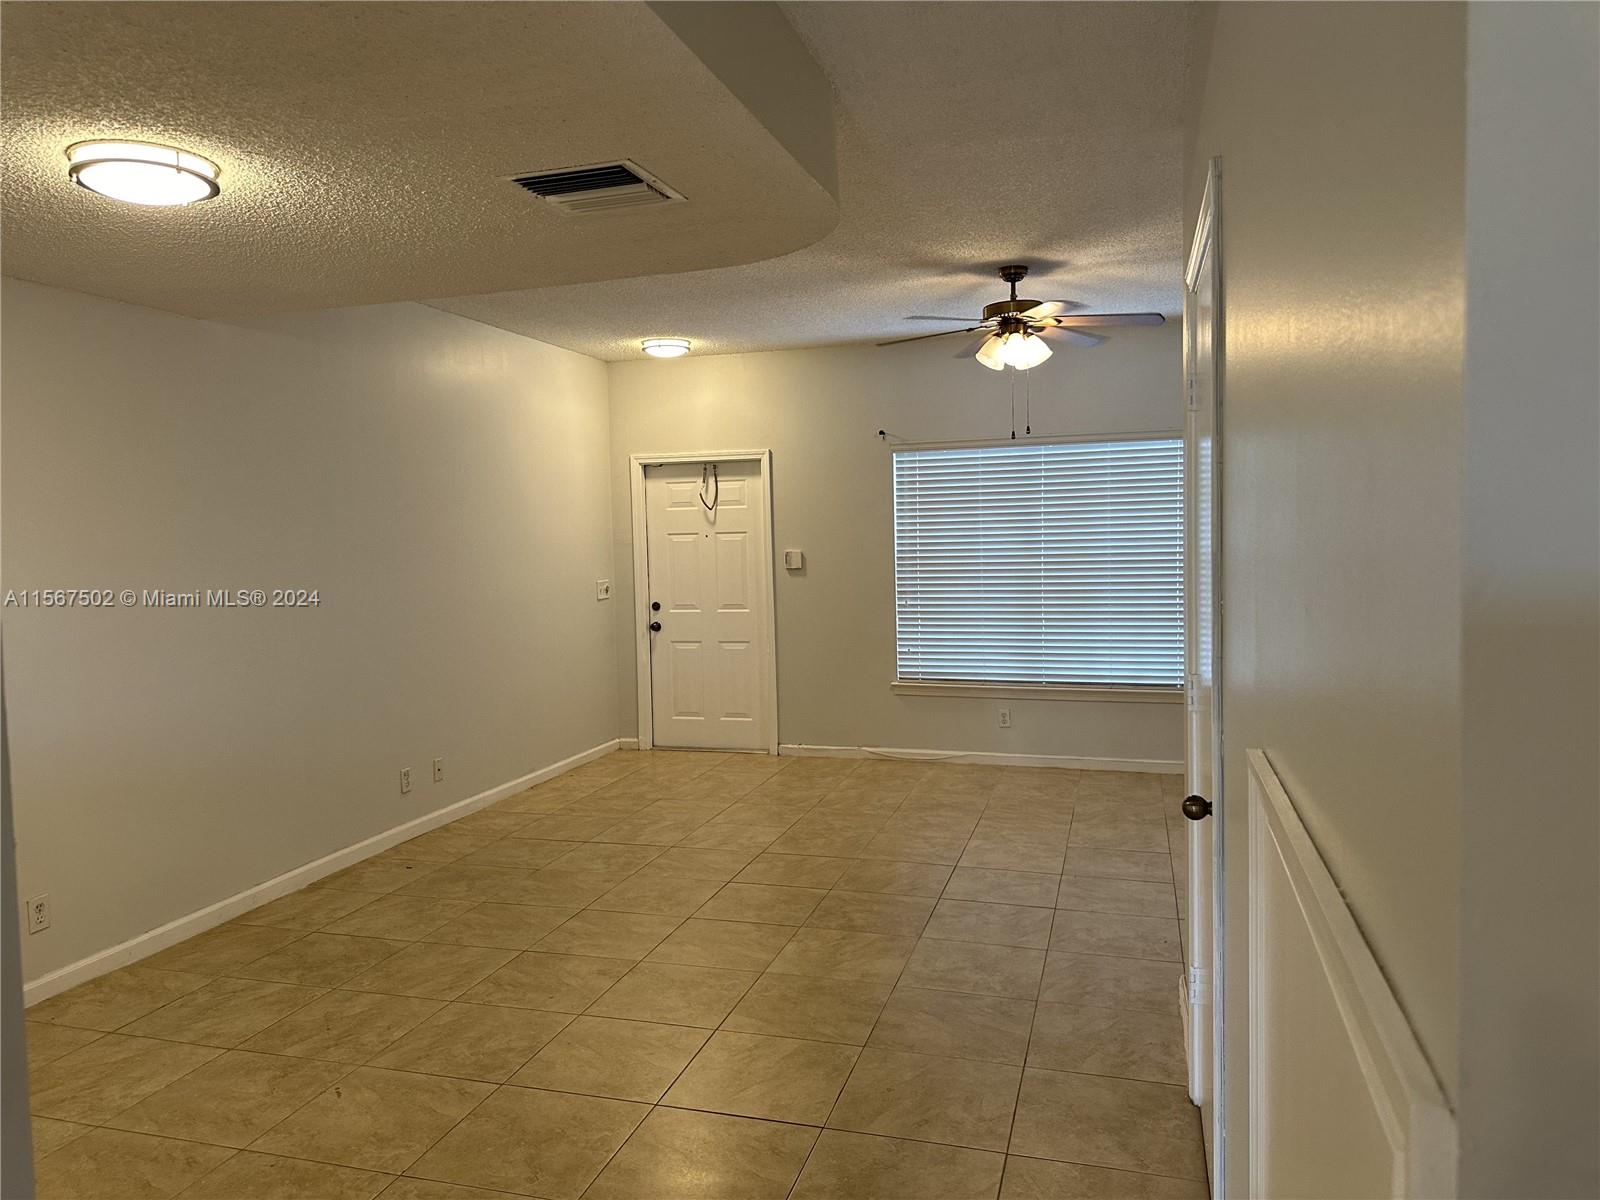 Coral Springs, Florida 33076, 3 Bedrooms Bedrooms, ,2 BathroomsBathrooms,Residentiallease,For Rent,A11567502